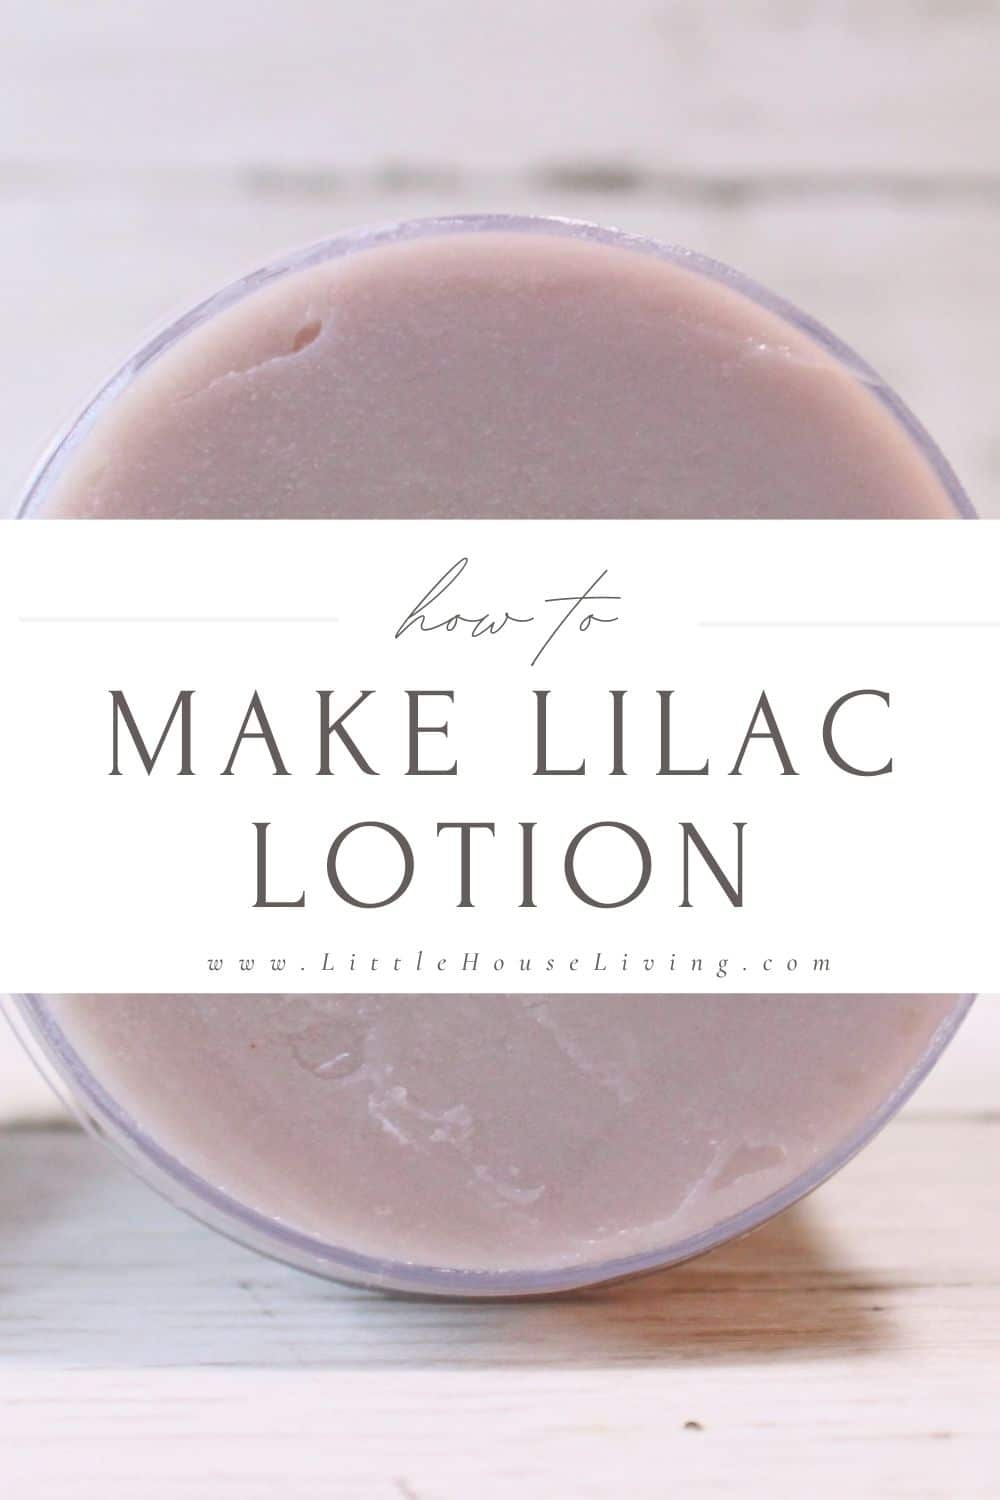 Want to enjoy the scent of lilacs long after the season is over? Here's how to make your own Lilac Lotion using simple ingredients!